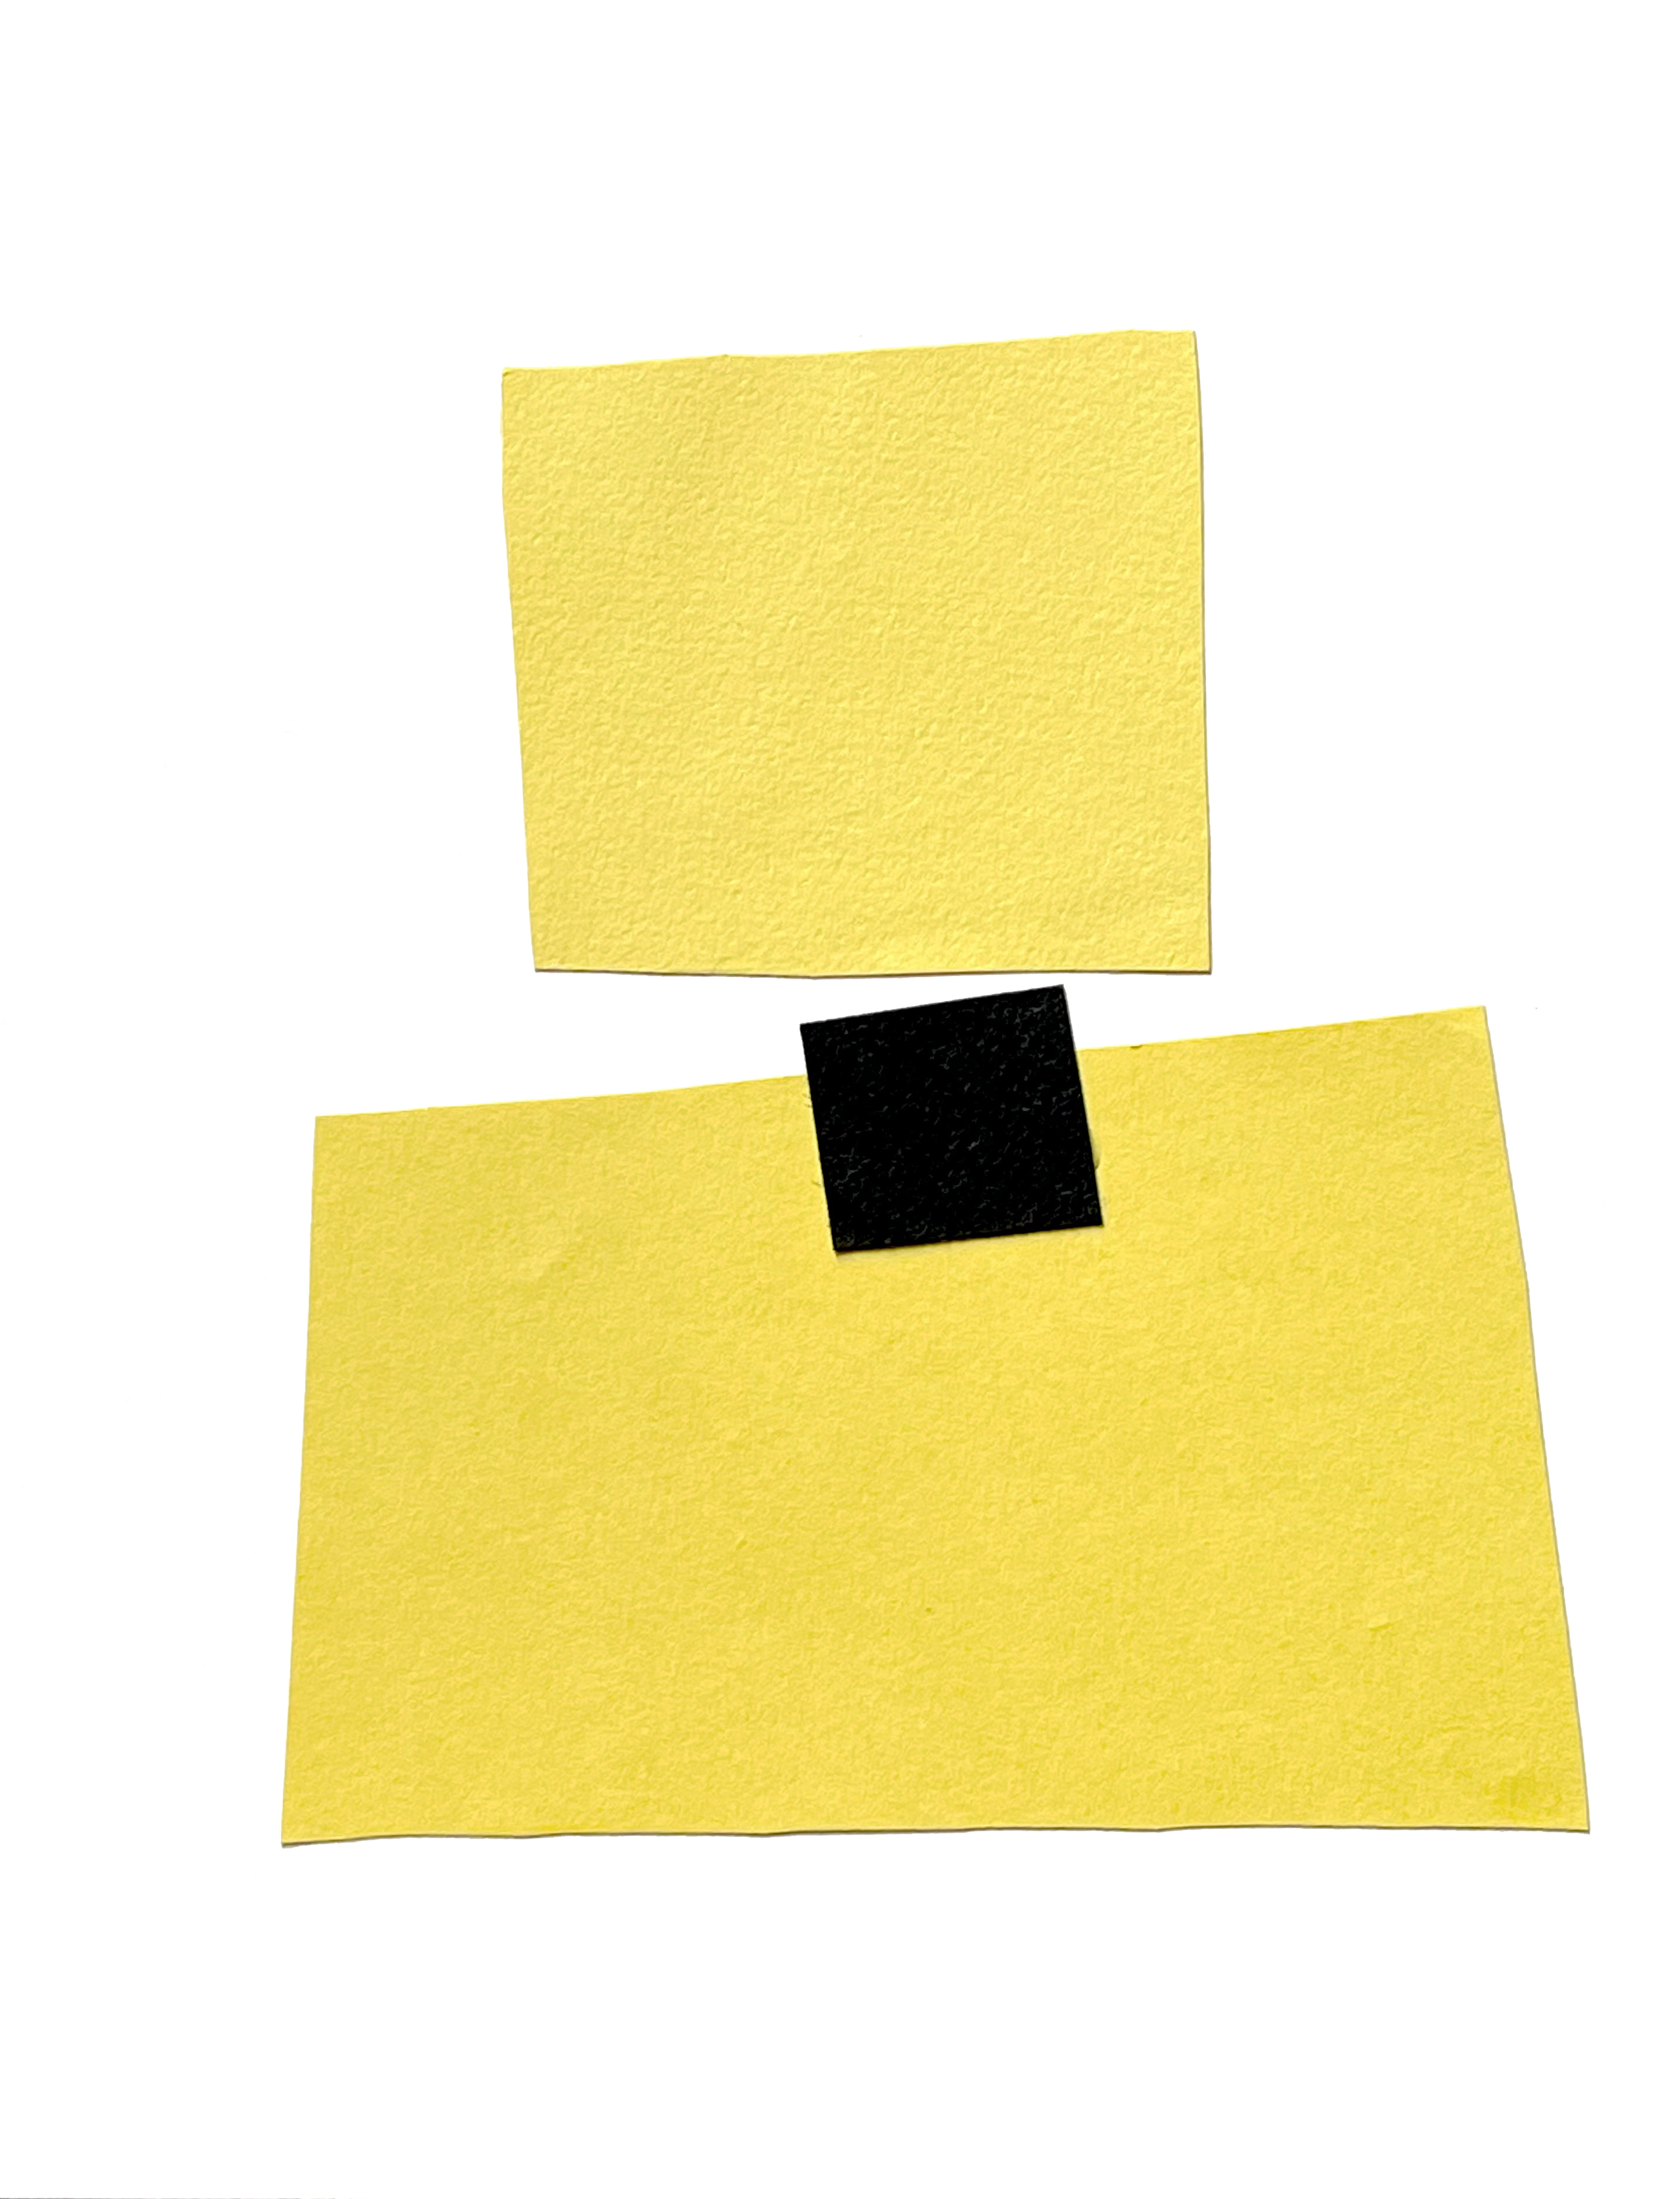 View Image Details Yellow Homage To A Black Square